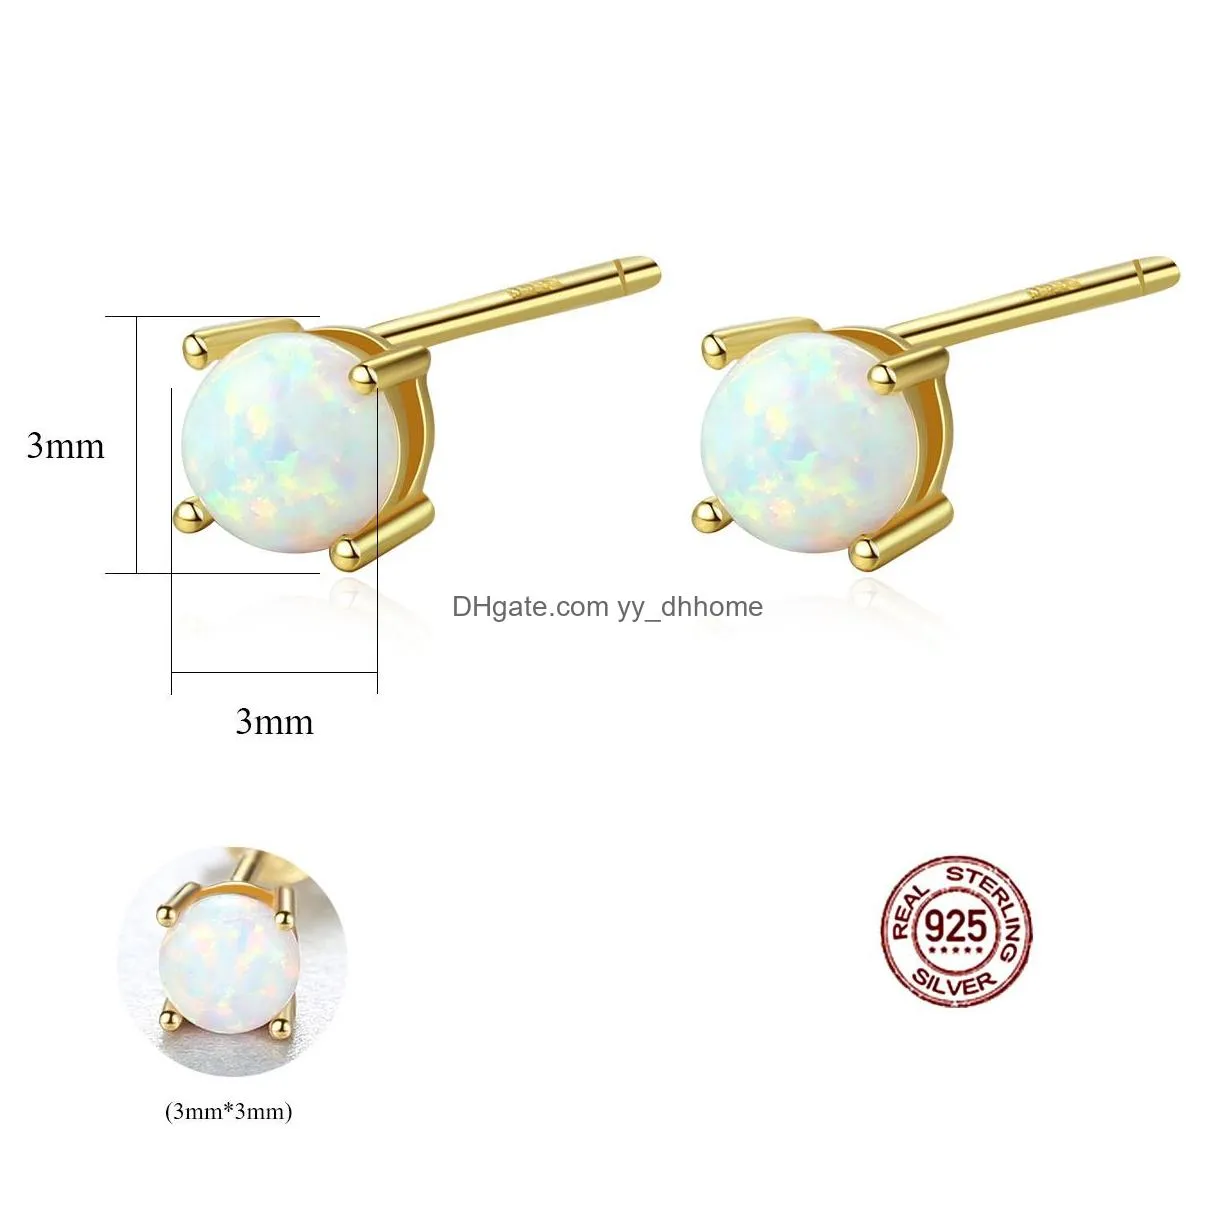 charm women round opal s925 sterling silver stud earrings fashion luxury brand high end earrings female rrtro plated 18k gold earrings jewelry valentines day